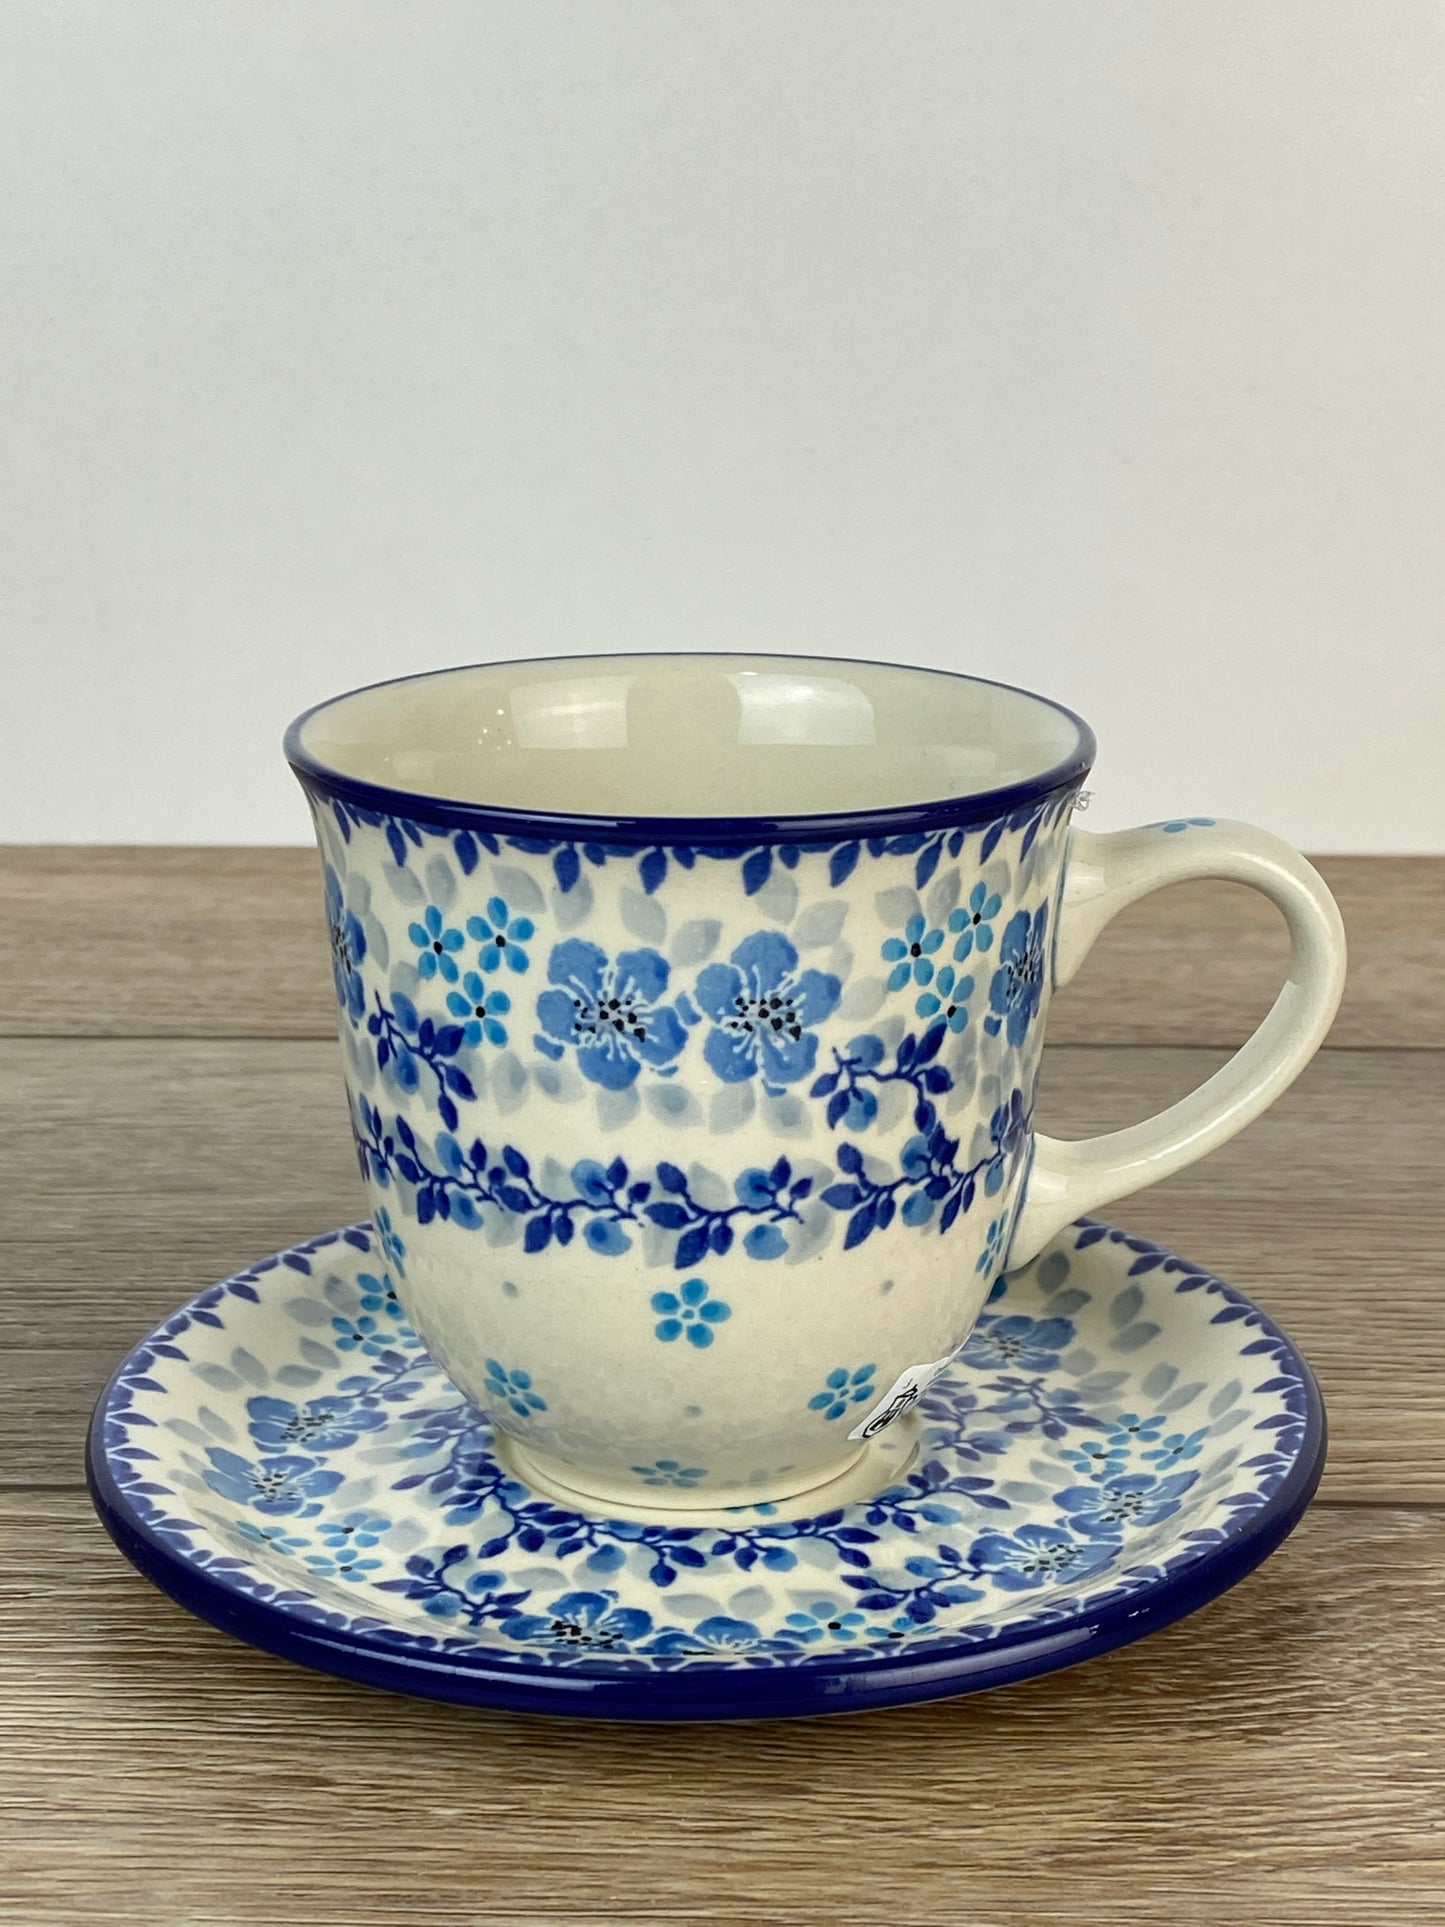 10oz Cup and Saucer - Shape 773 - Pattern 2642